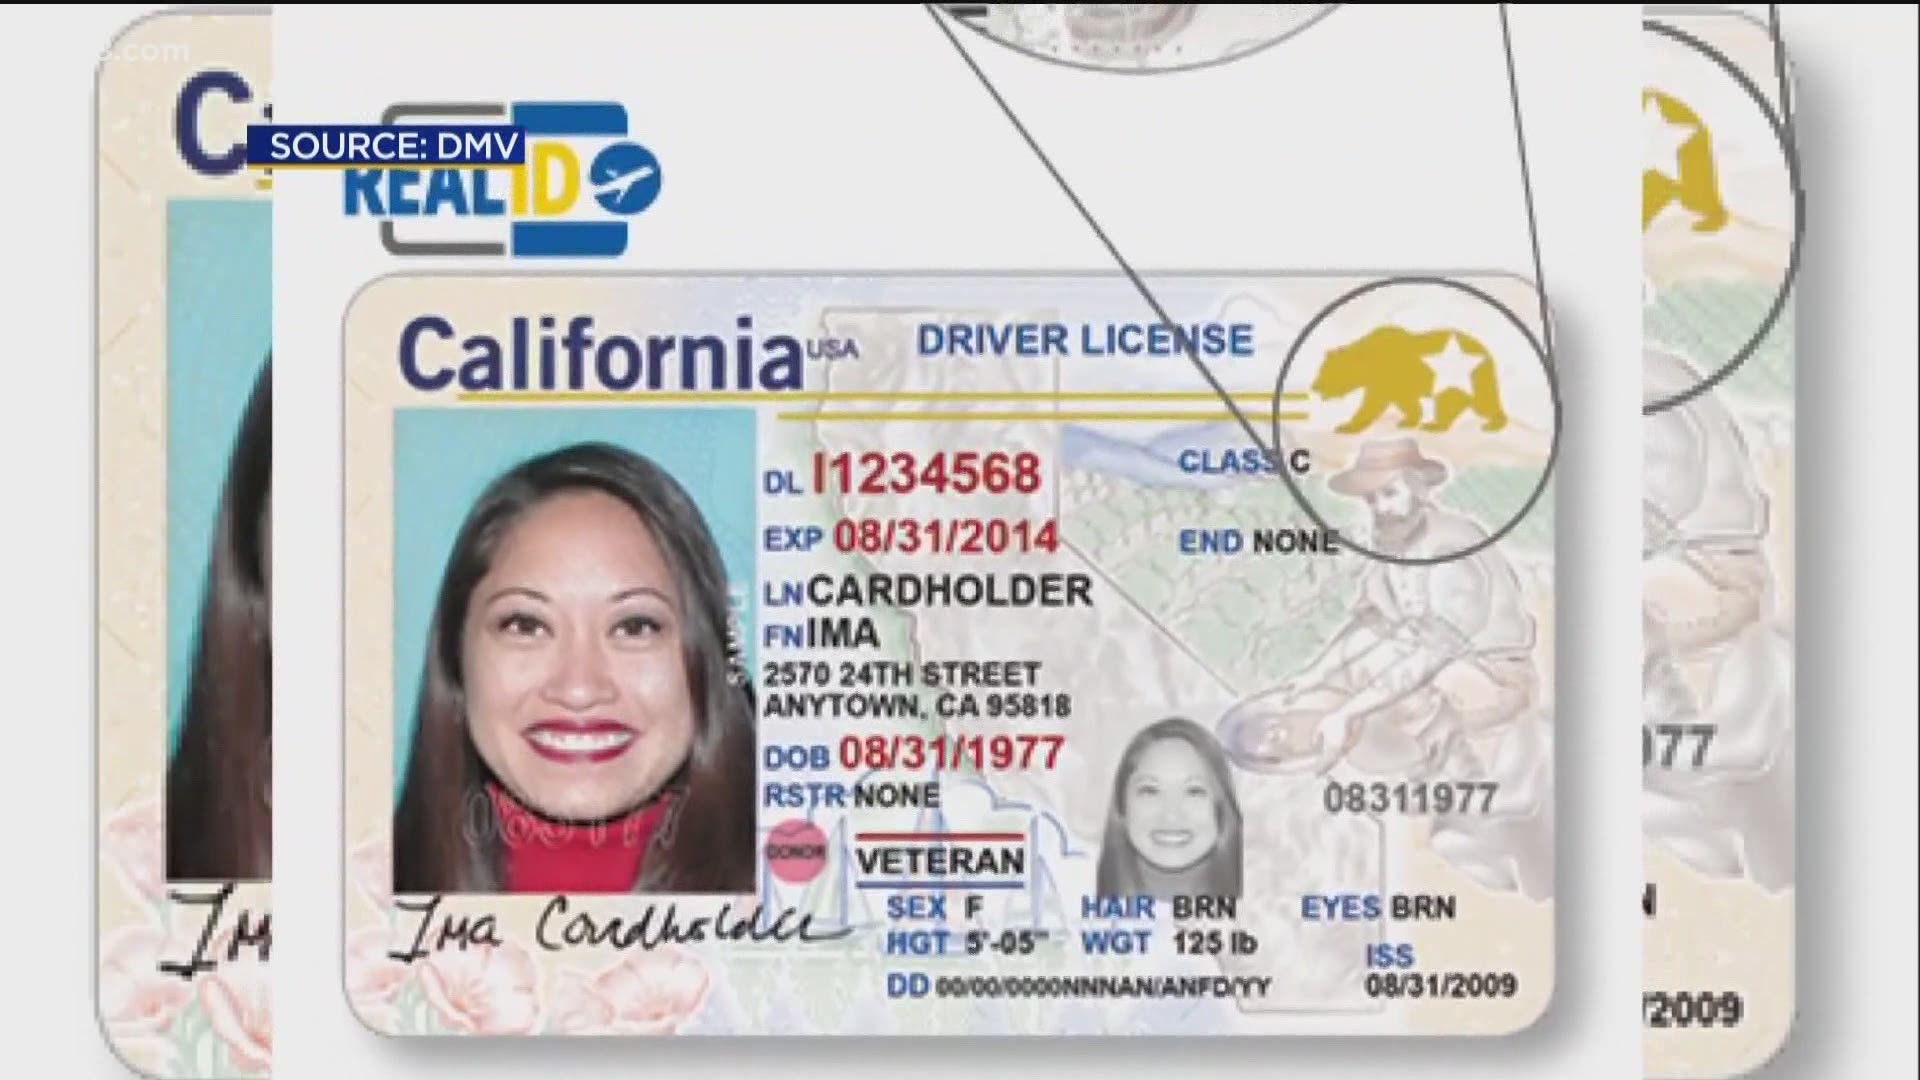 Americans now have more time to get the Real ID with the deadline extended to May 2023, but a DMV spokesperson urges all not to put it off until the last minute.